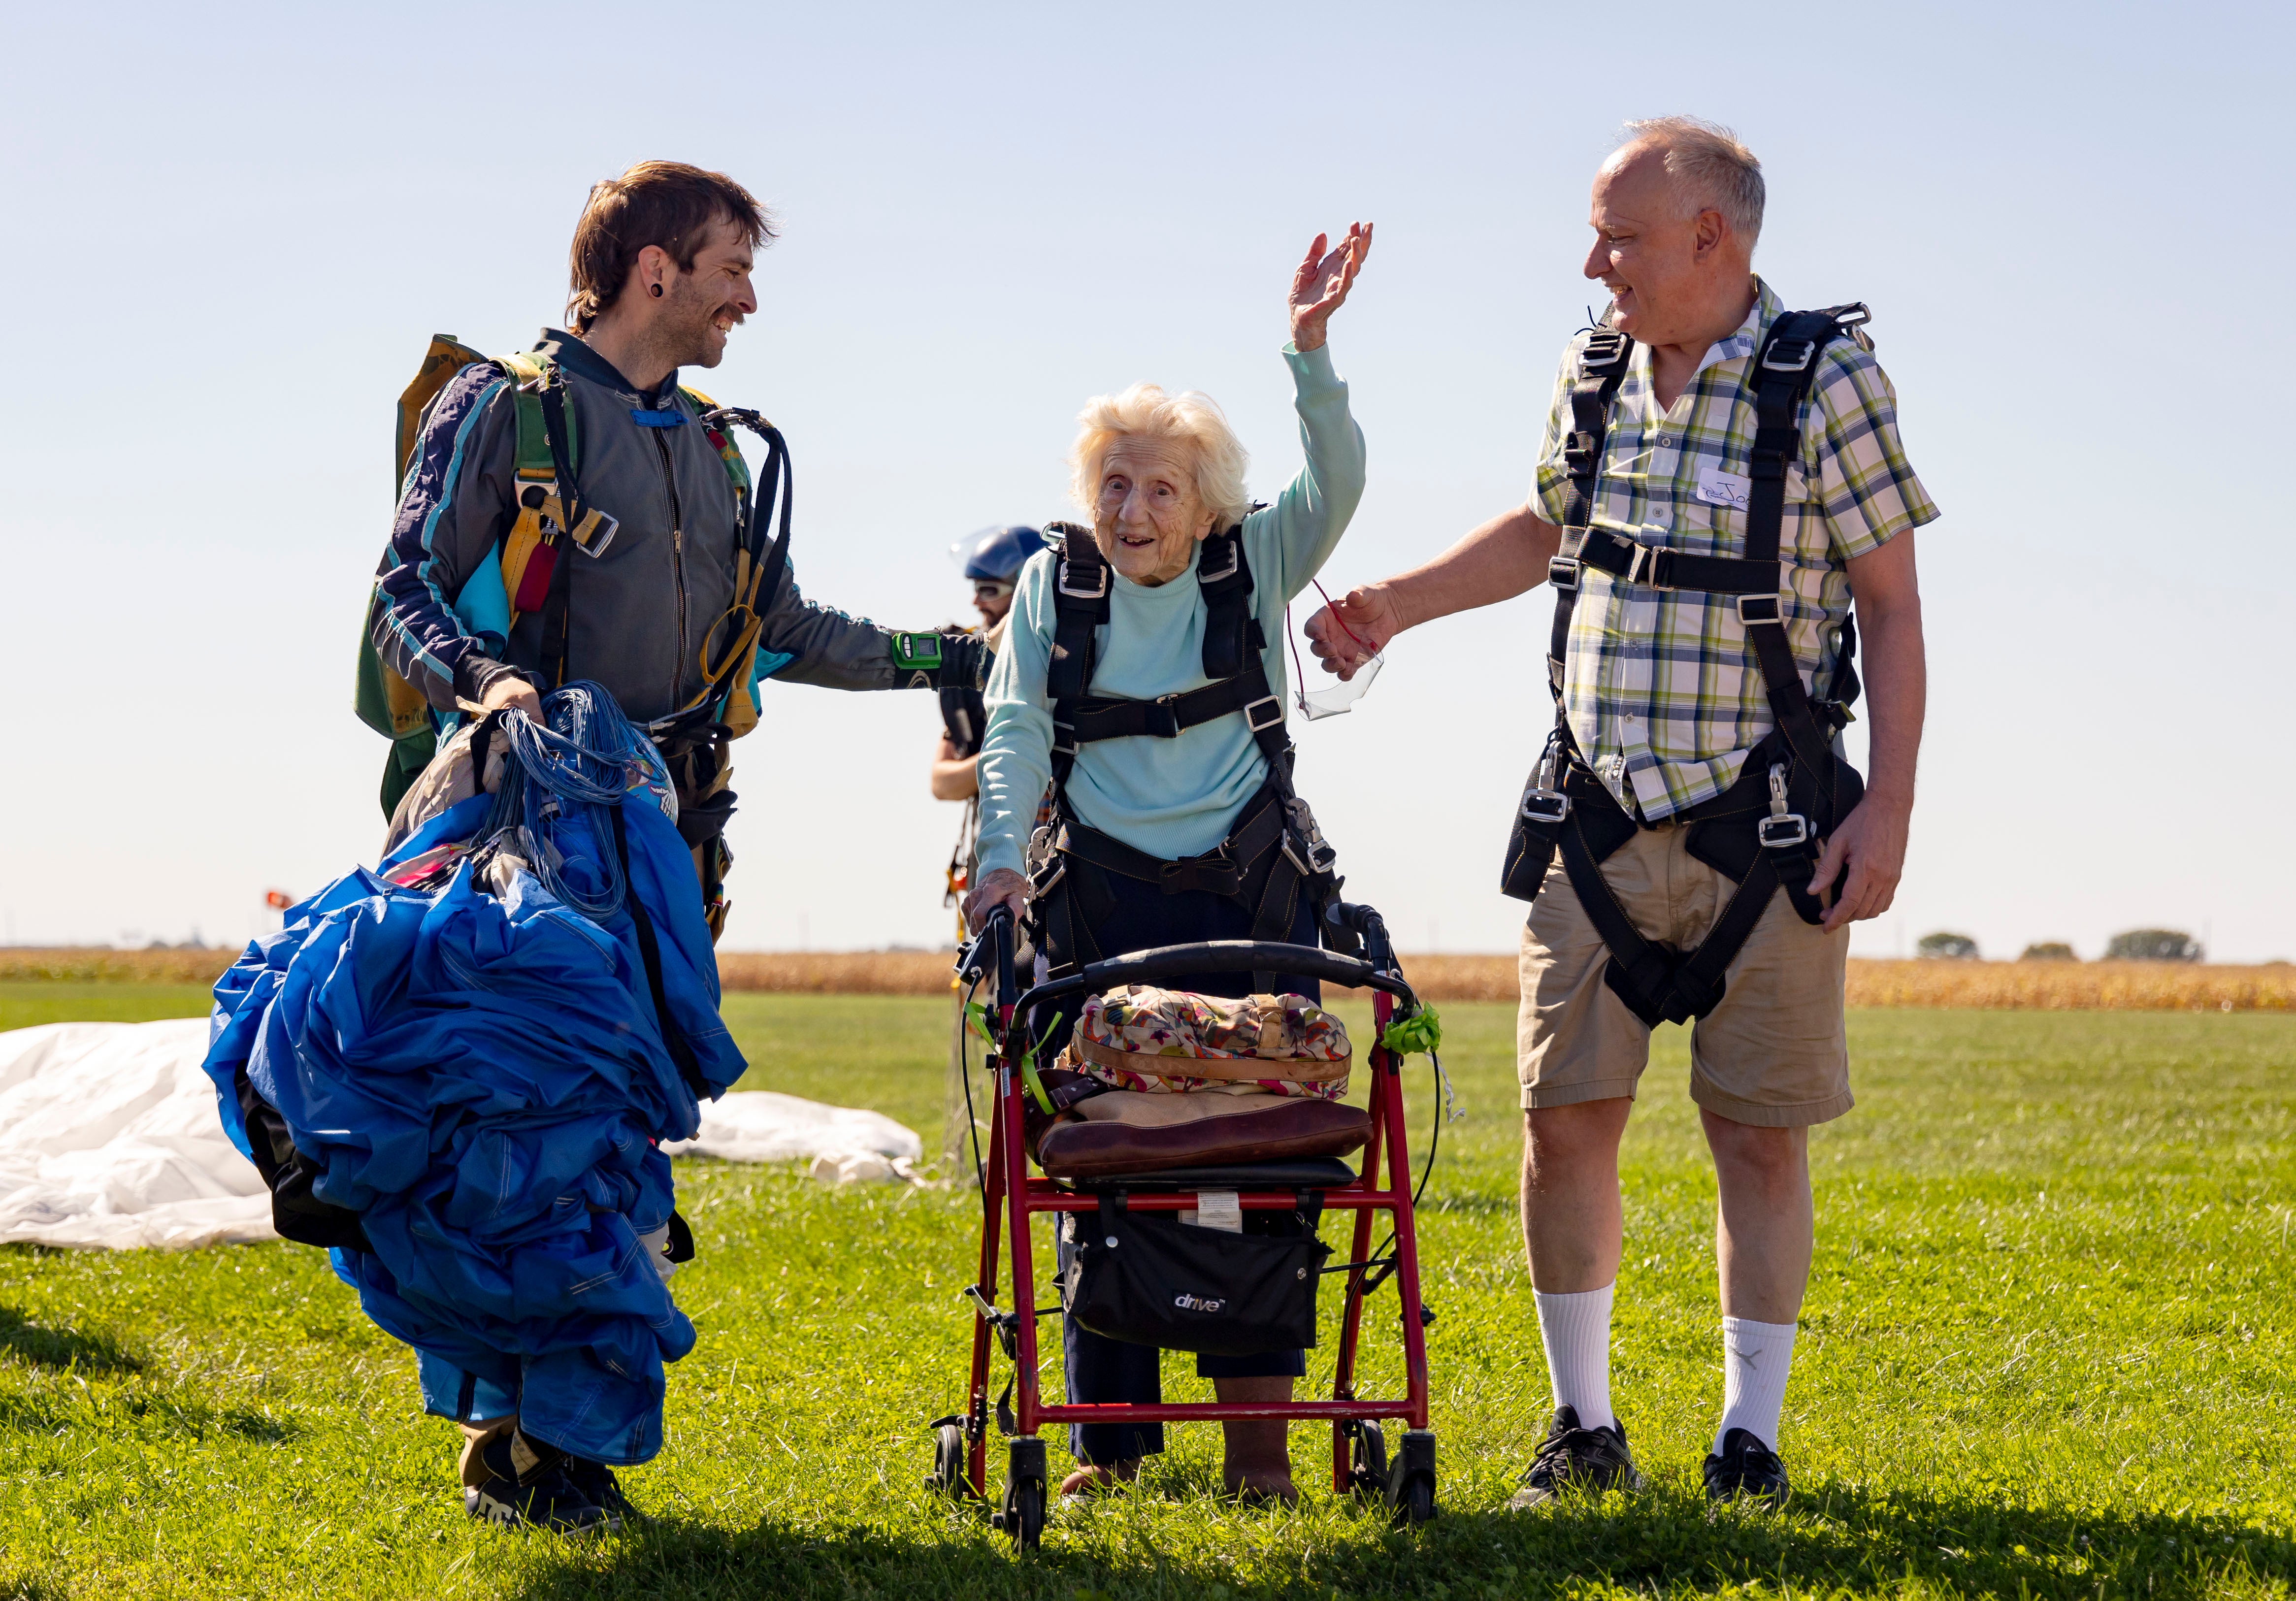 Dorothy Hoffner, 104, waves to the crowd with Daniel Wilsey (left) and friend Joe Conant on 1 October